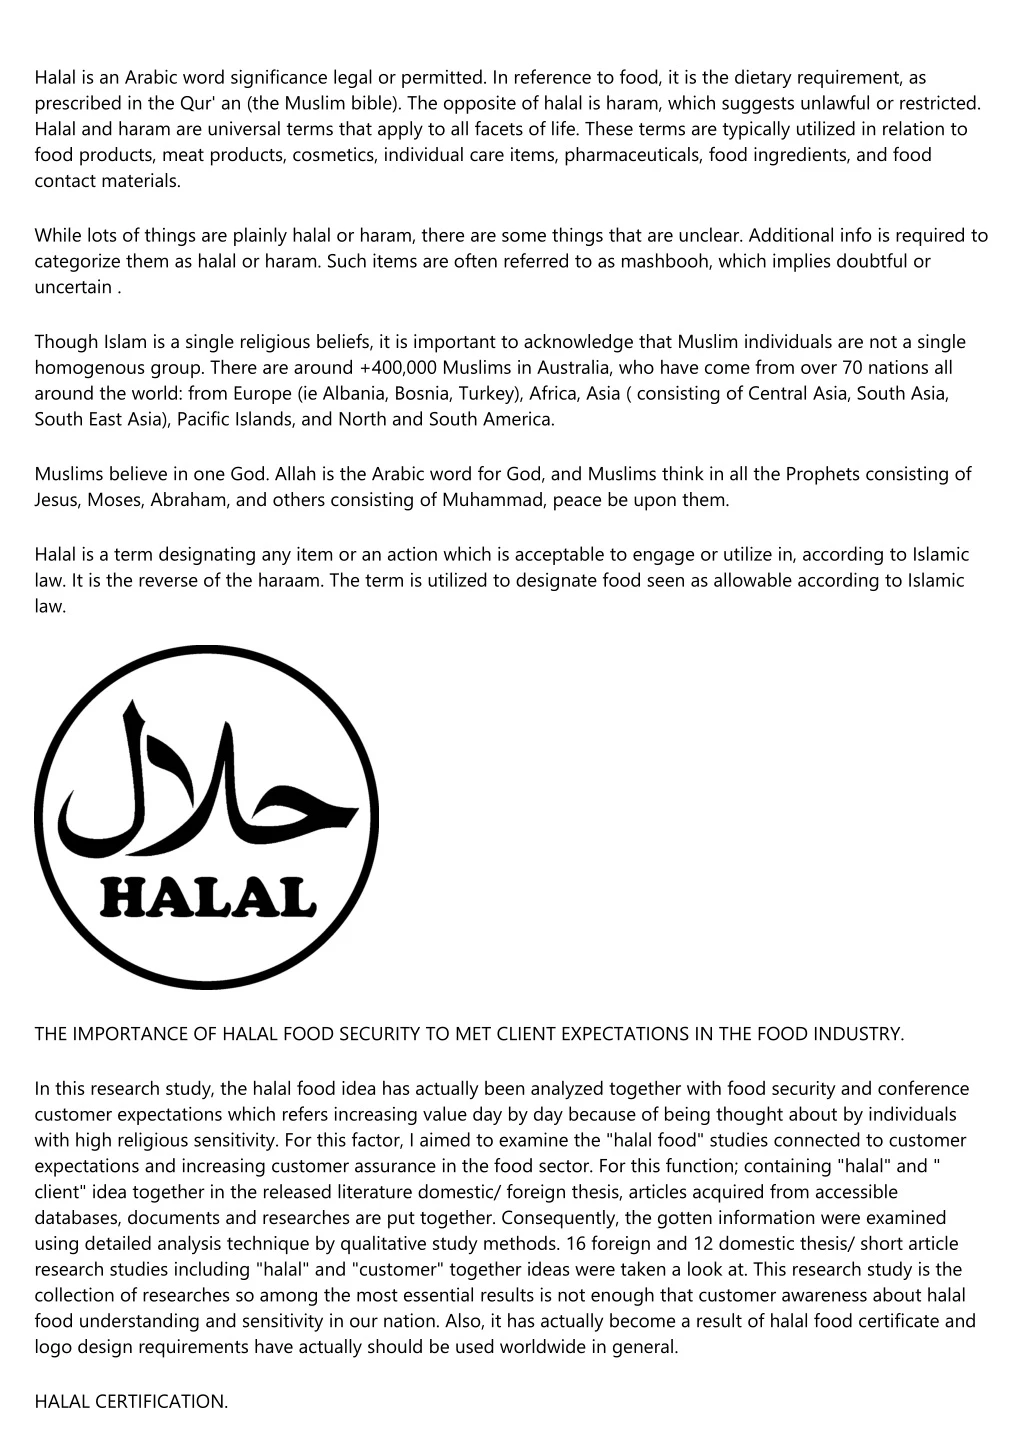 halal is an arabic word significance legal